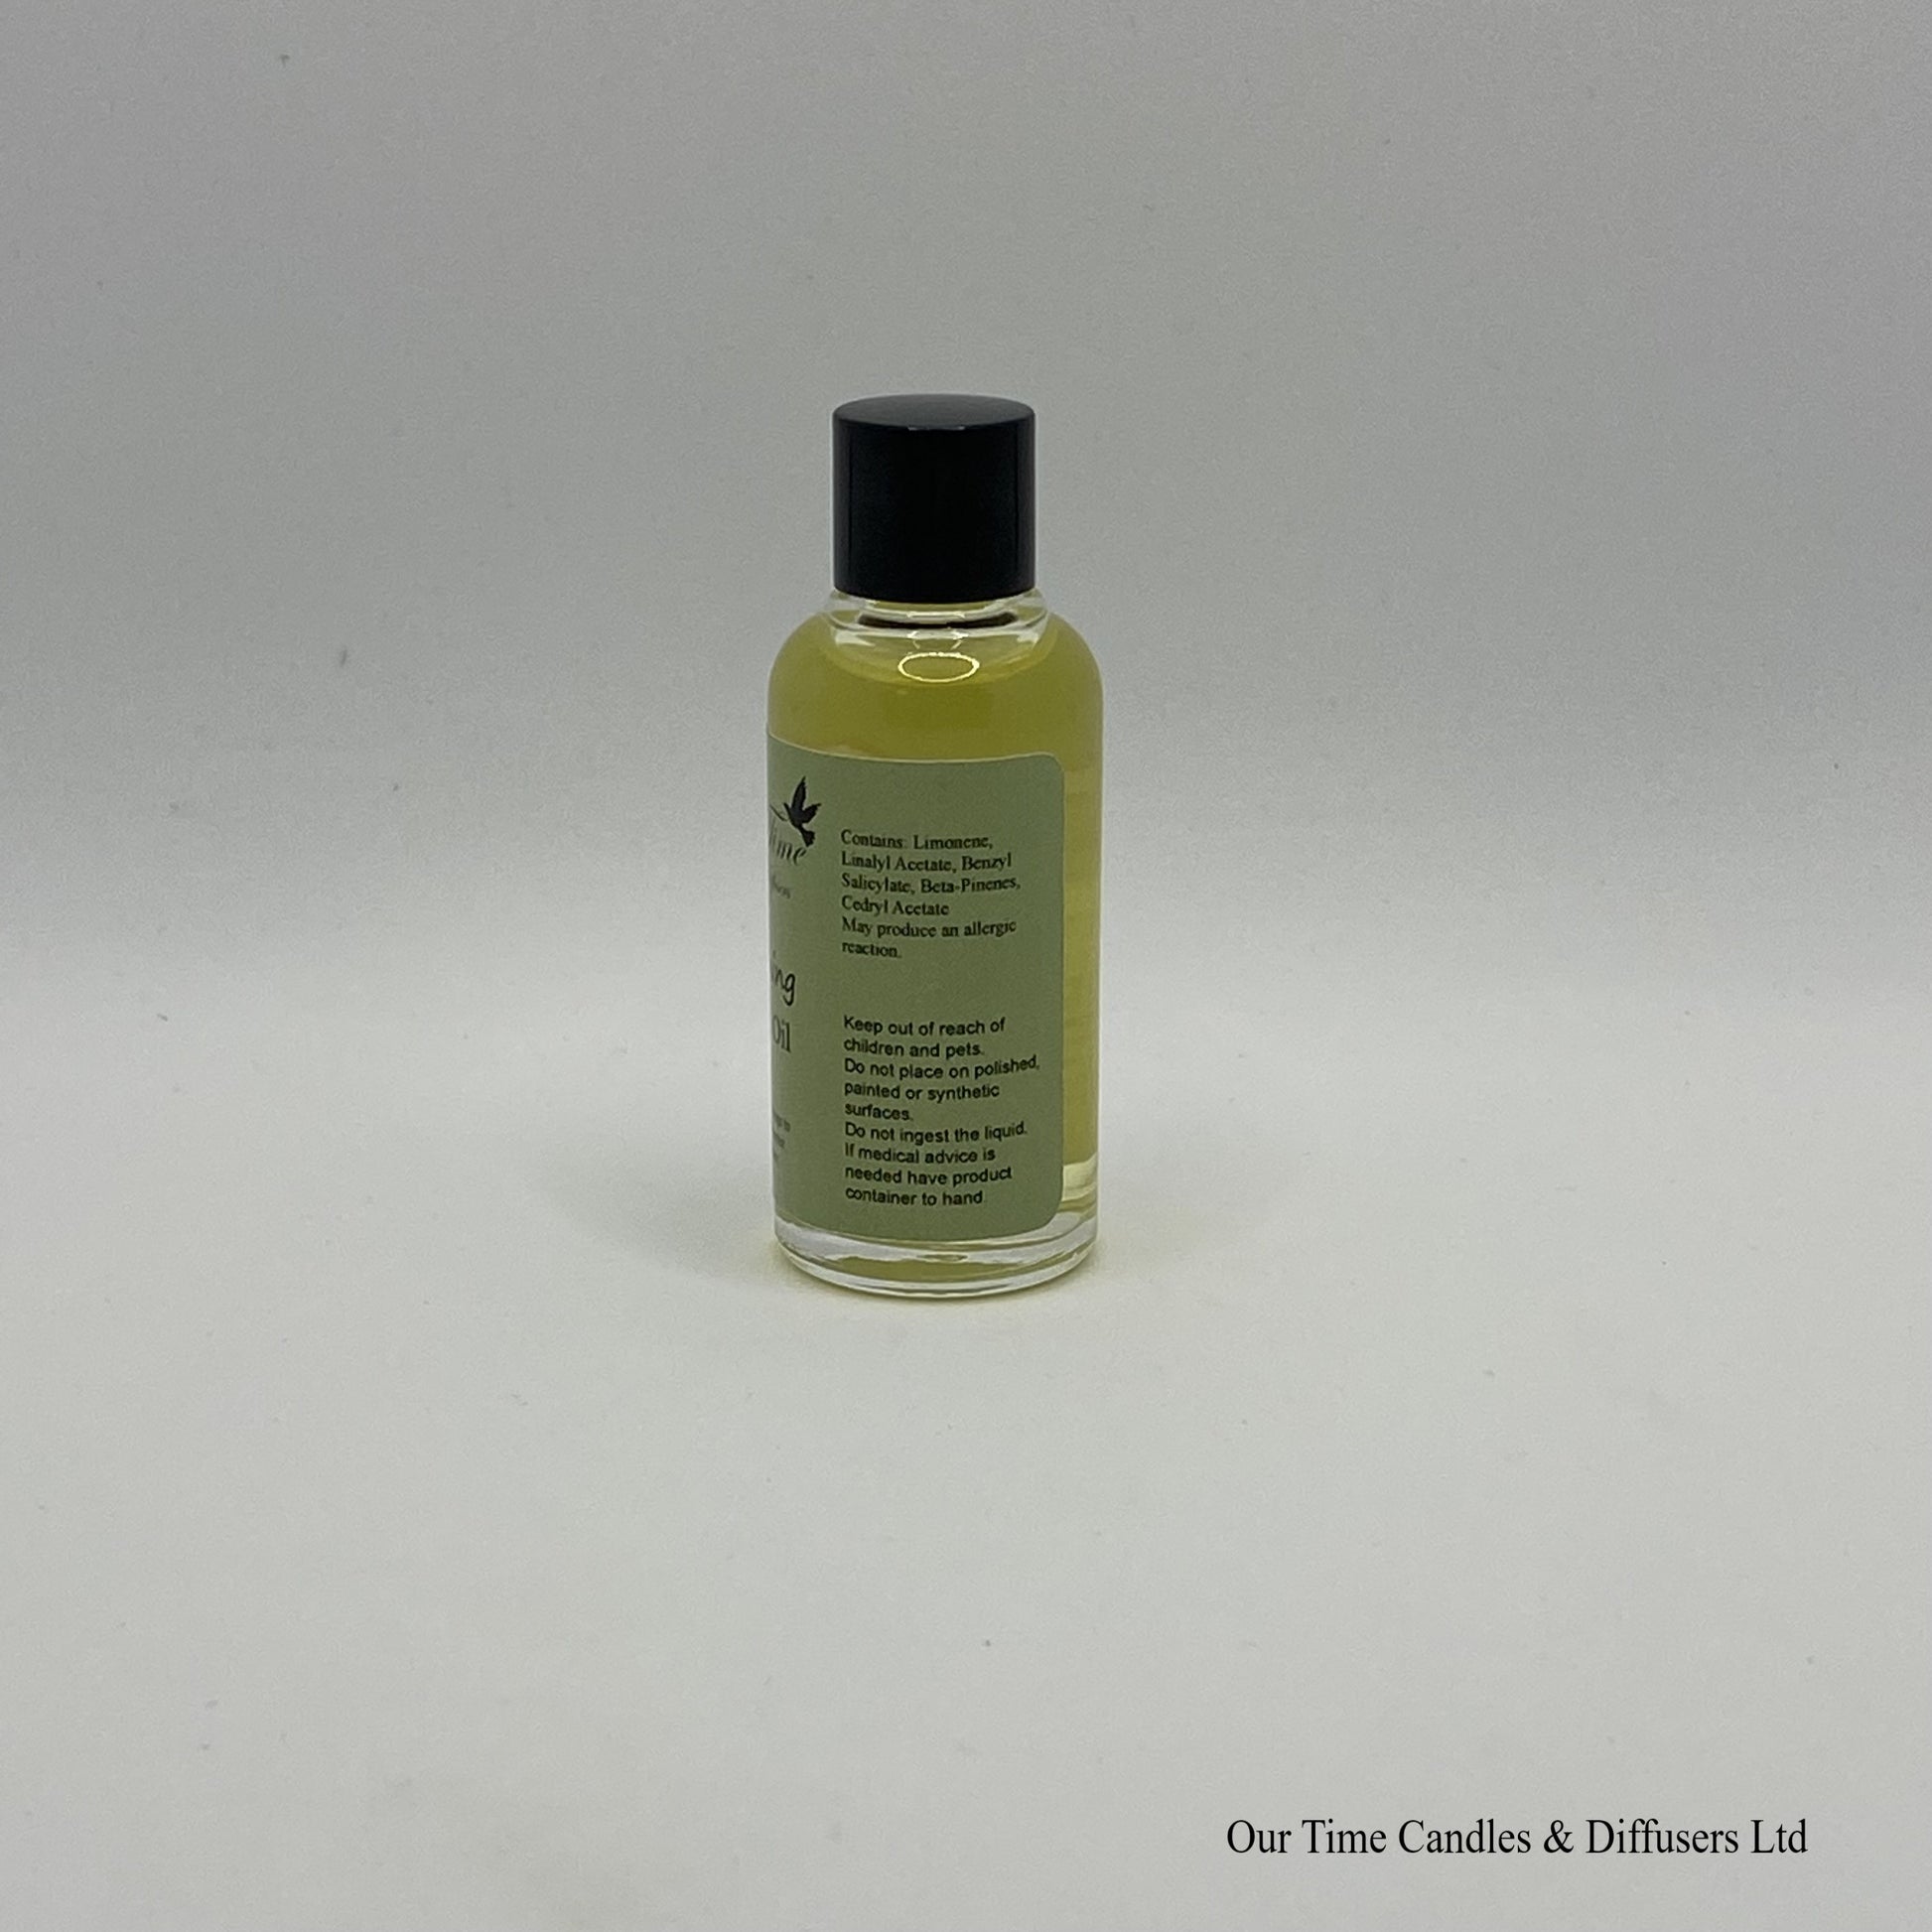 Scented Oil 15ml Refreshing